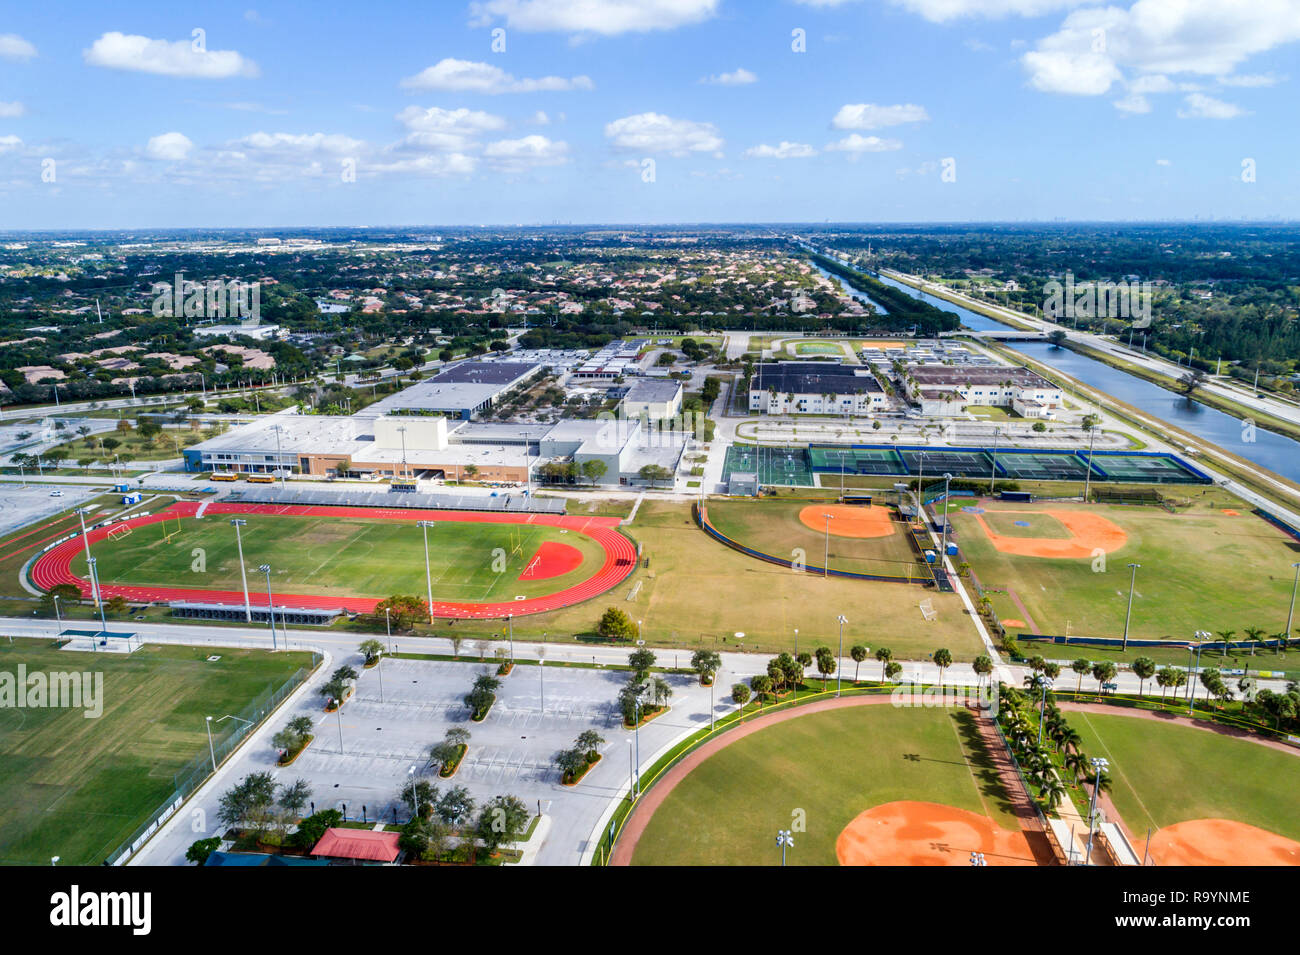 Weston Florida,Fort Ft. Lauderdale,aerial overhead view from above,Cypress Bay High School,Vista Park,track baseball diamonds,FL181222d12 Stock Photo